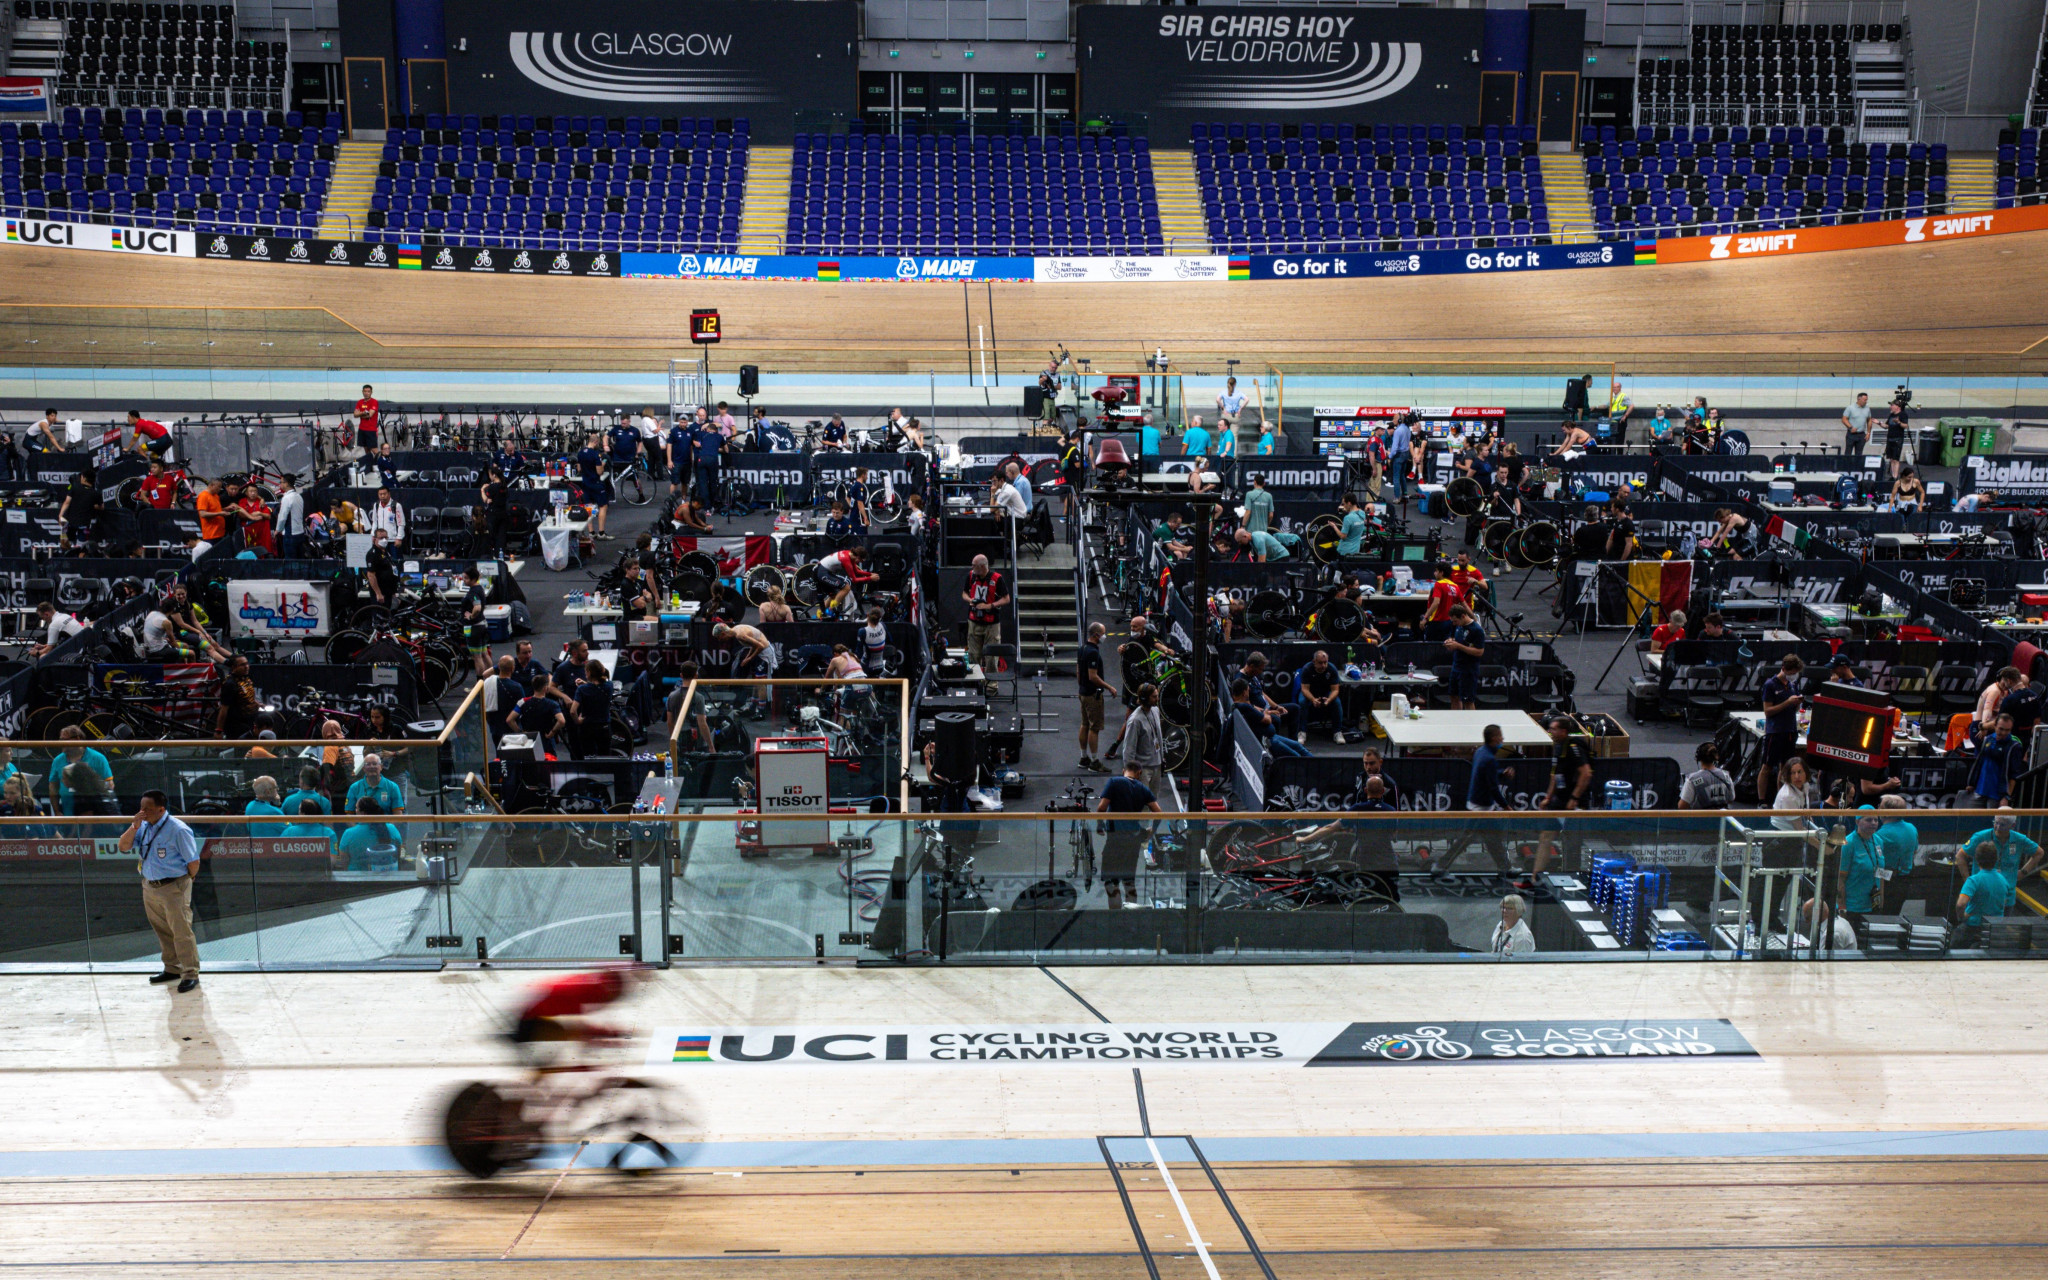 Paris 2024 quotas to spice up UCI Cycling World Championships in Glasgow